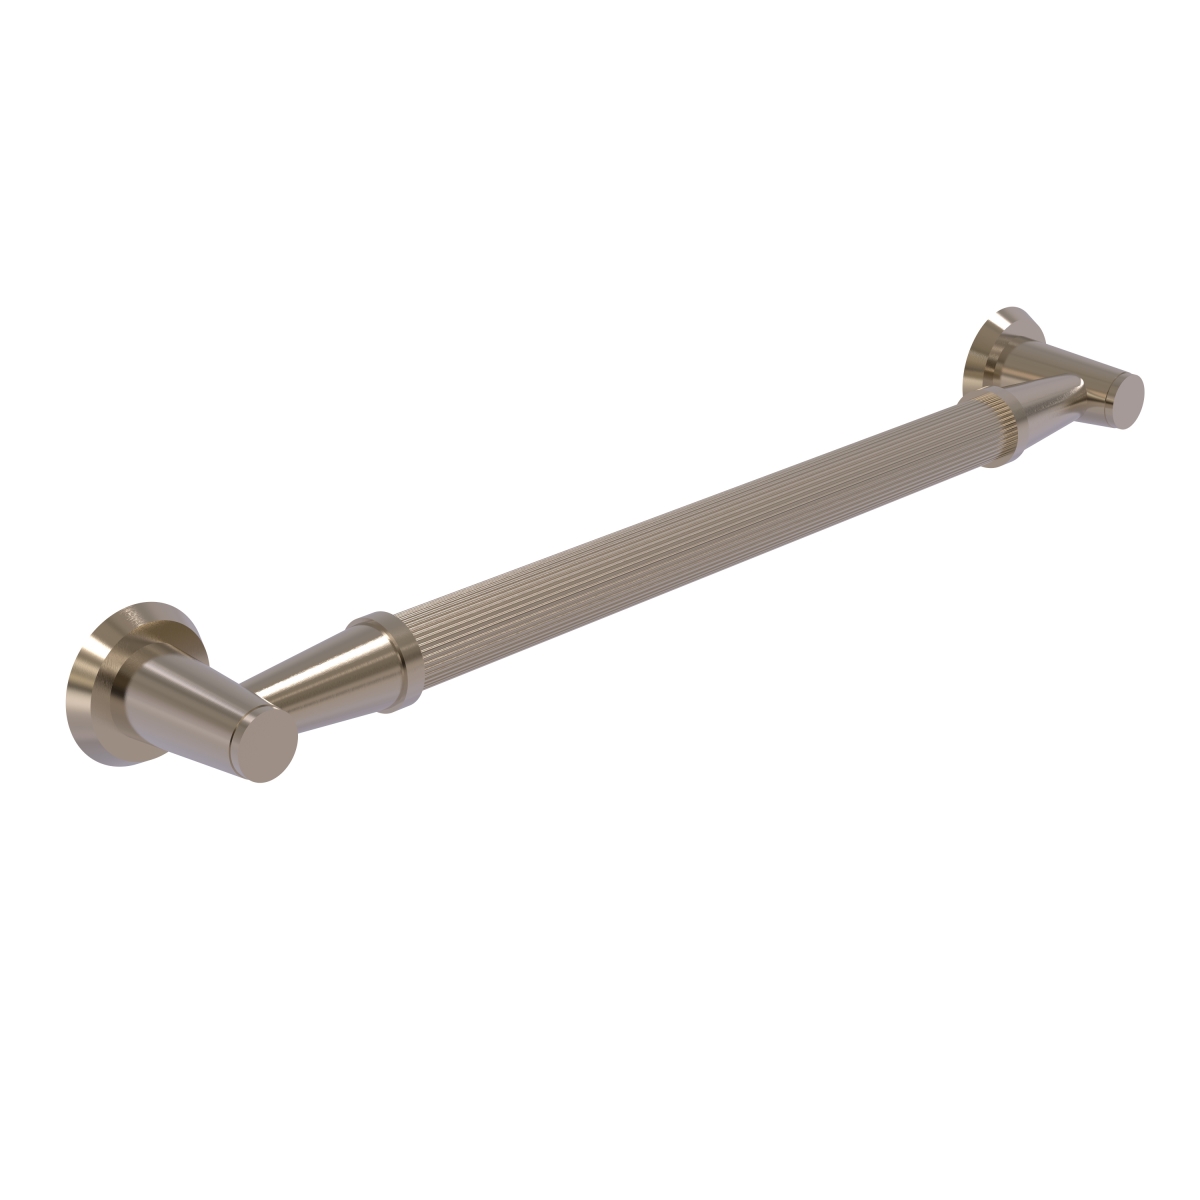 Picture of Allied Brass MD-GRR-16-PEW 16 in. Reeded Grab Bar, Antique Pewter - 3.5 x 18 x 16 in.